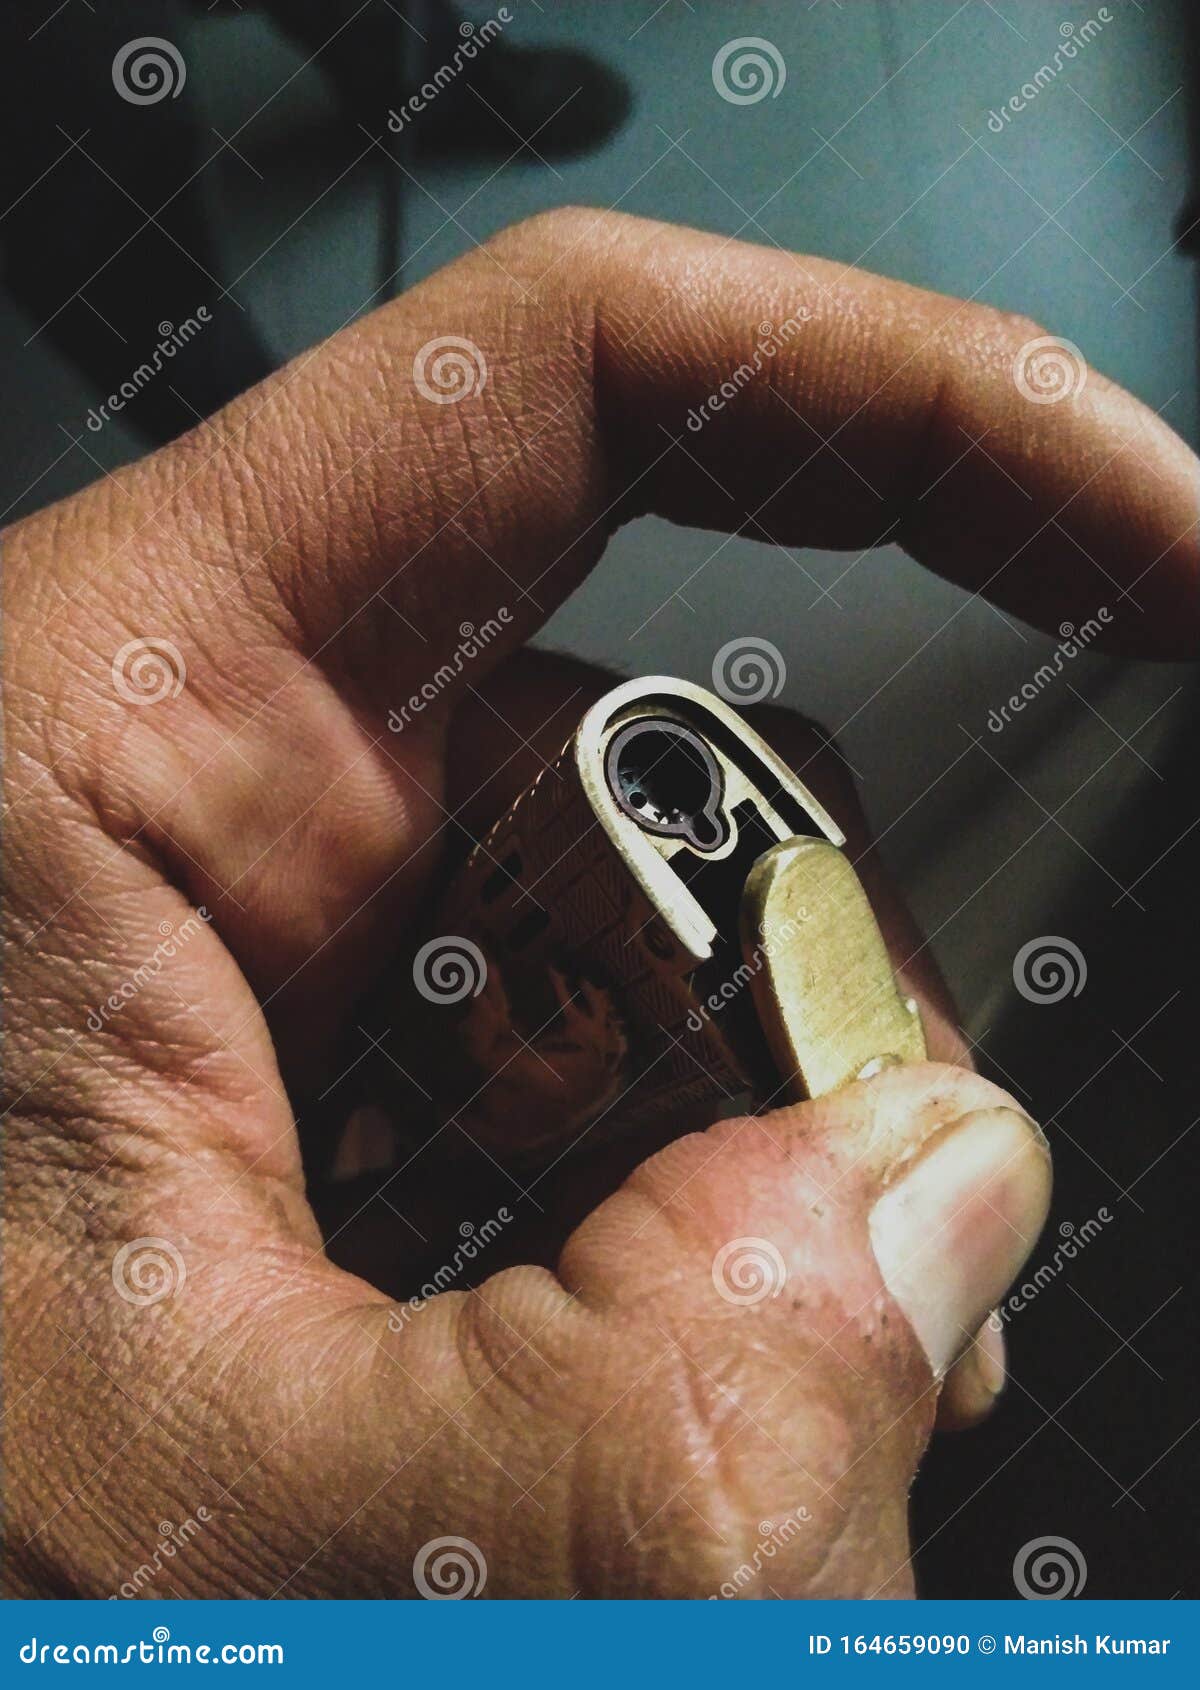 a person holding a golden lighter in his hand